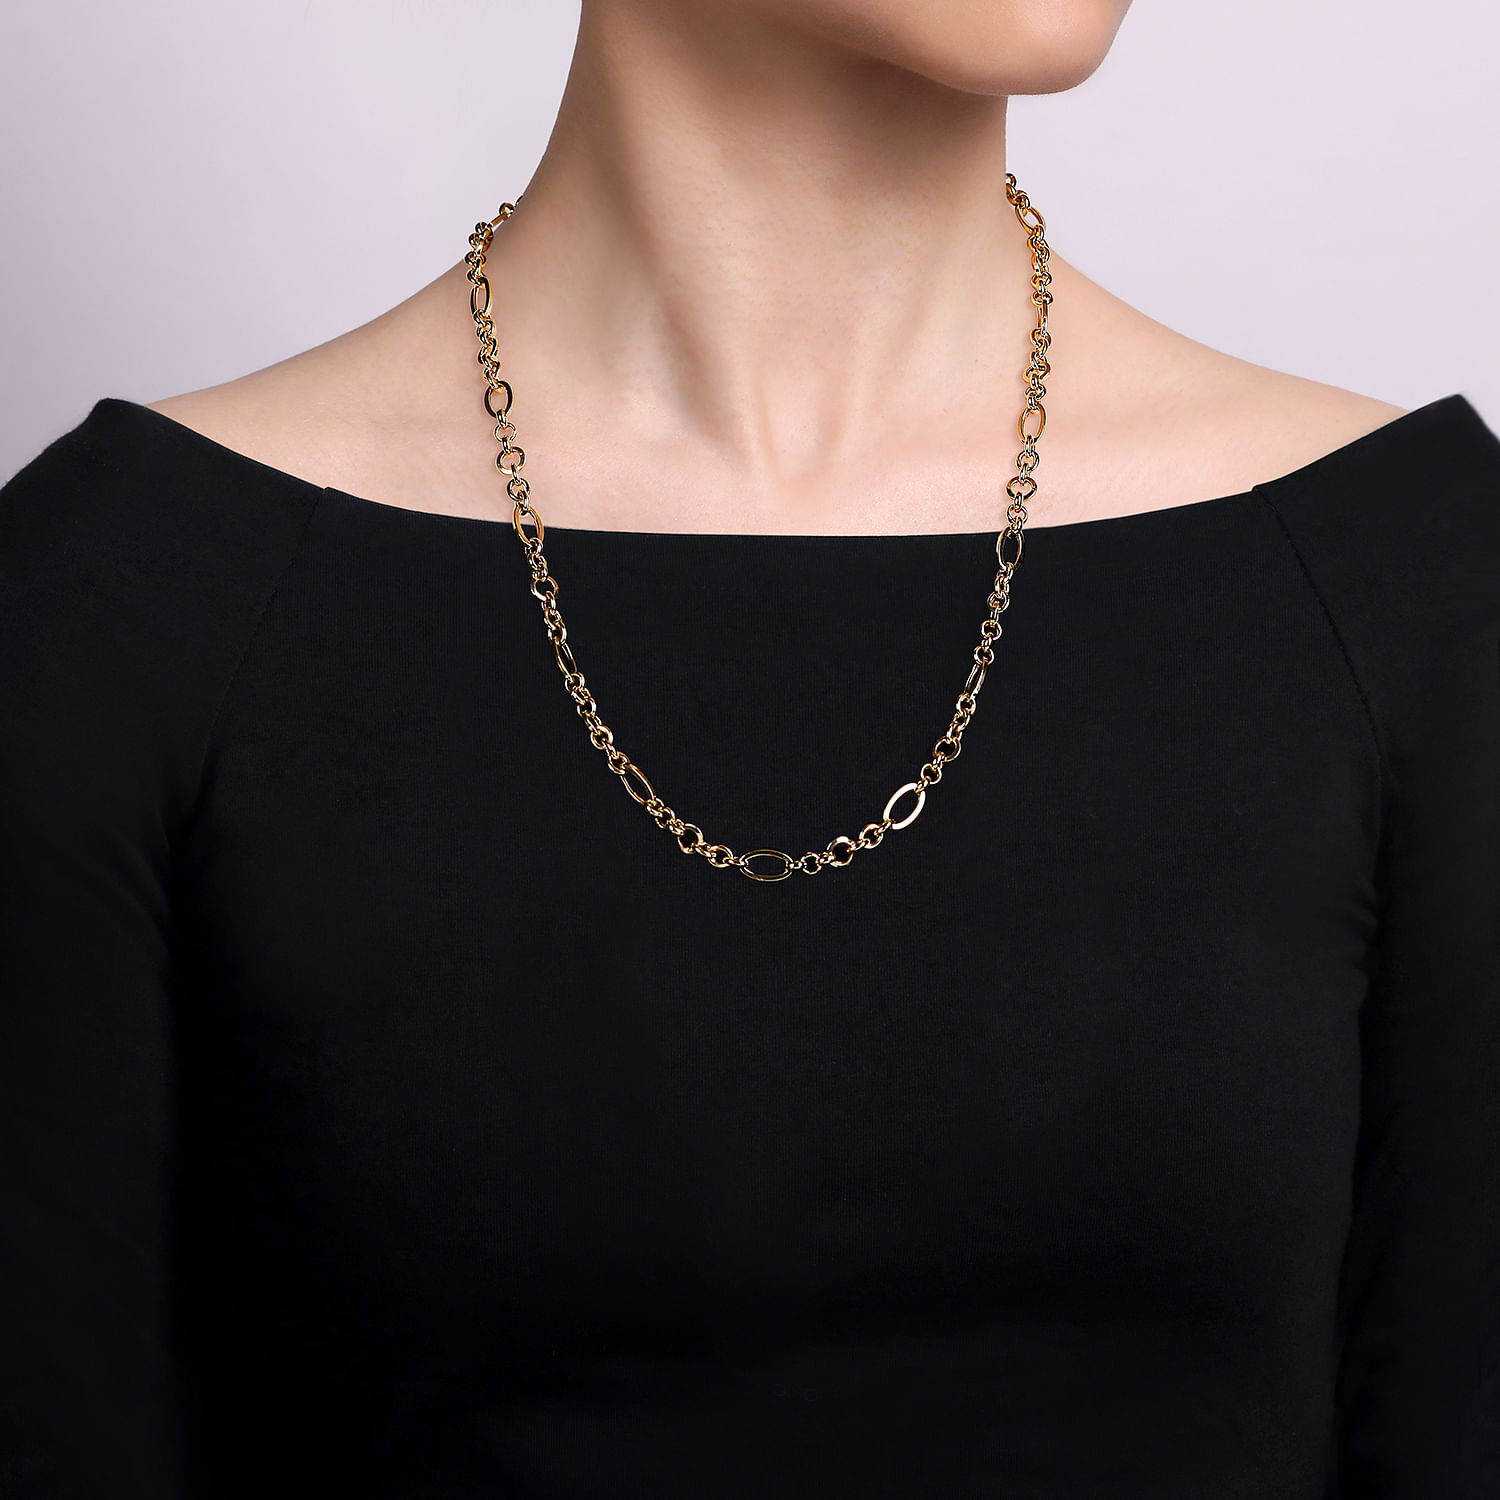 14K Yellow Gold Link Chain Necklace with Oval Stations